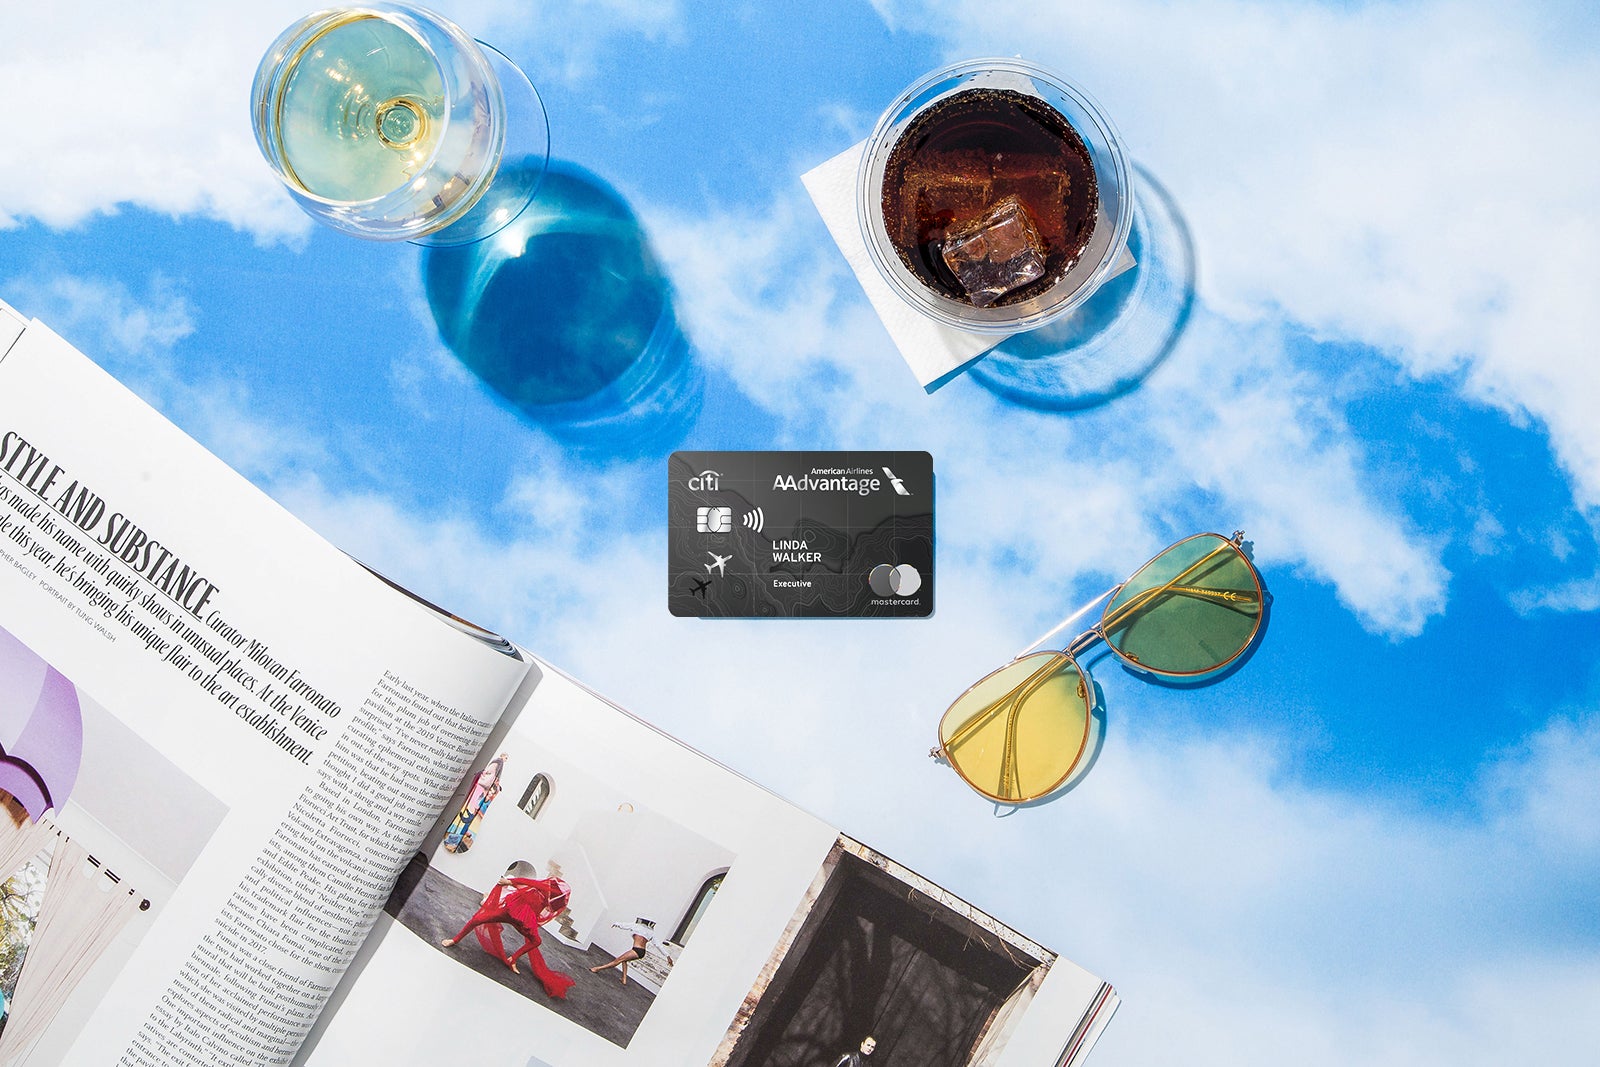 American Airlines cobranded credit card